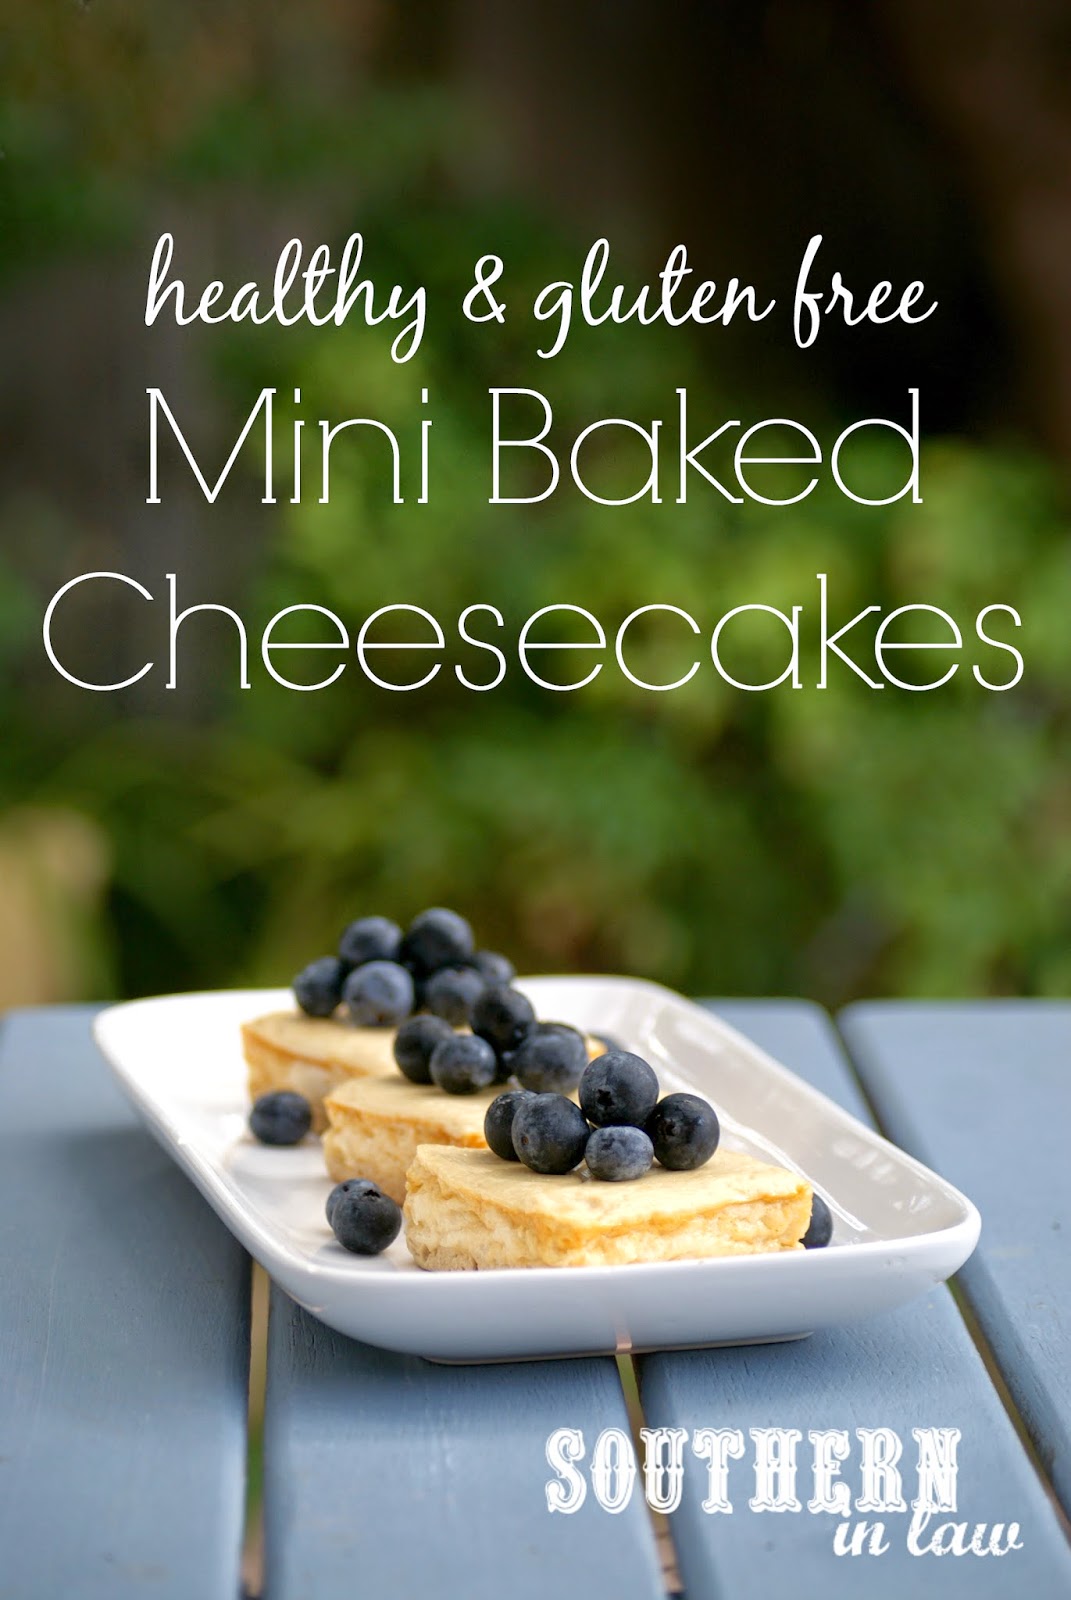 Healthy New York Style Cheesecake Recipe - Low Fat New York Baked Cheesecake Recipe - Gluten free, refined sugar free, egg free/eggless, low fat, healthy